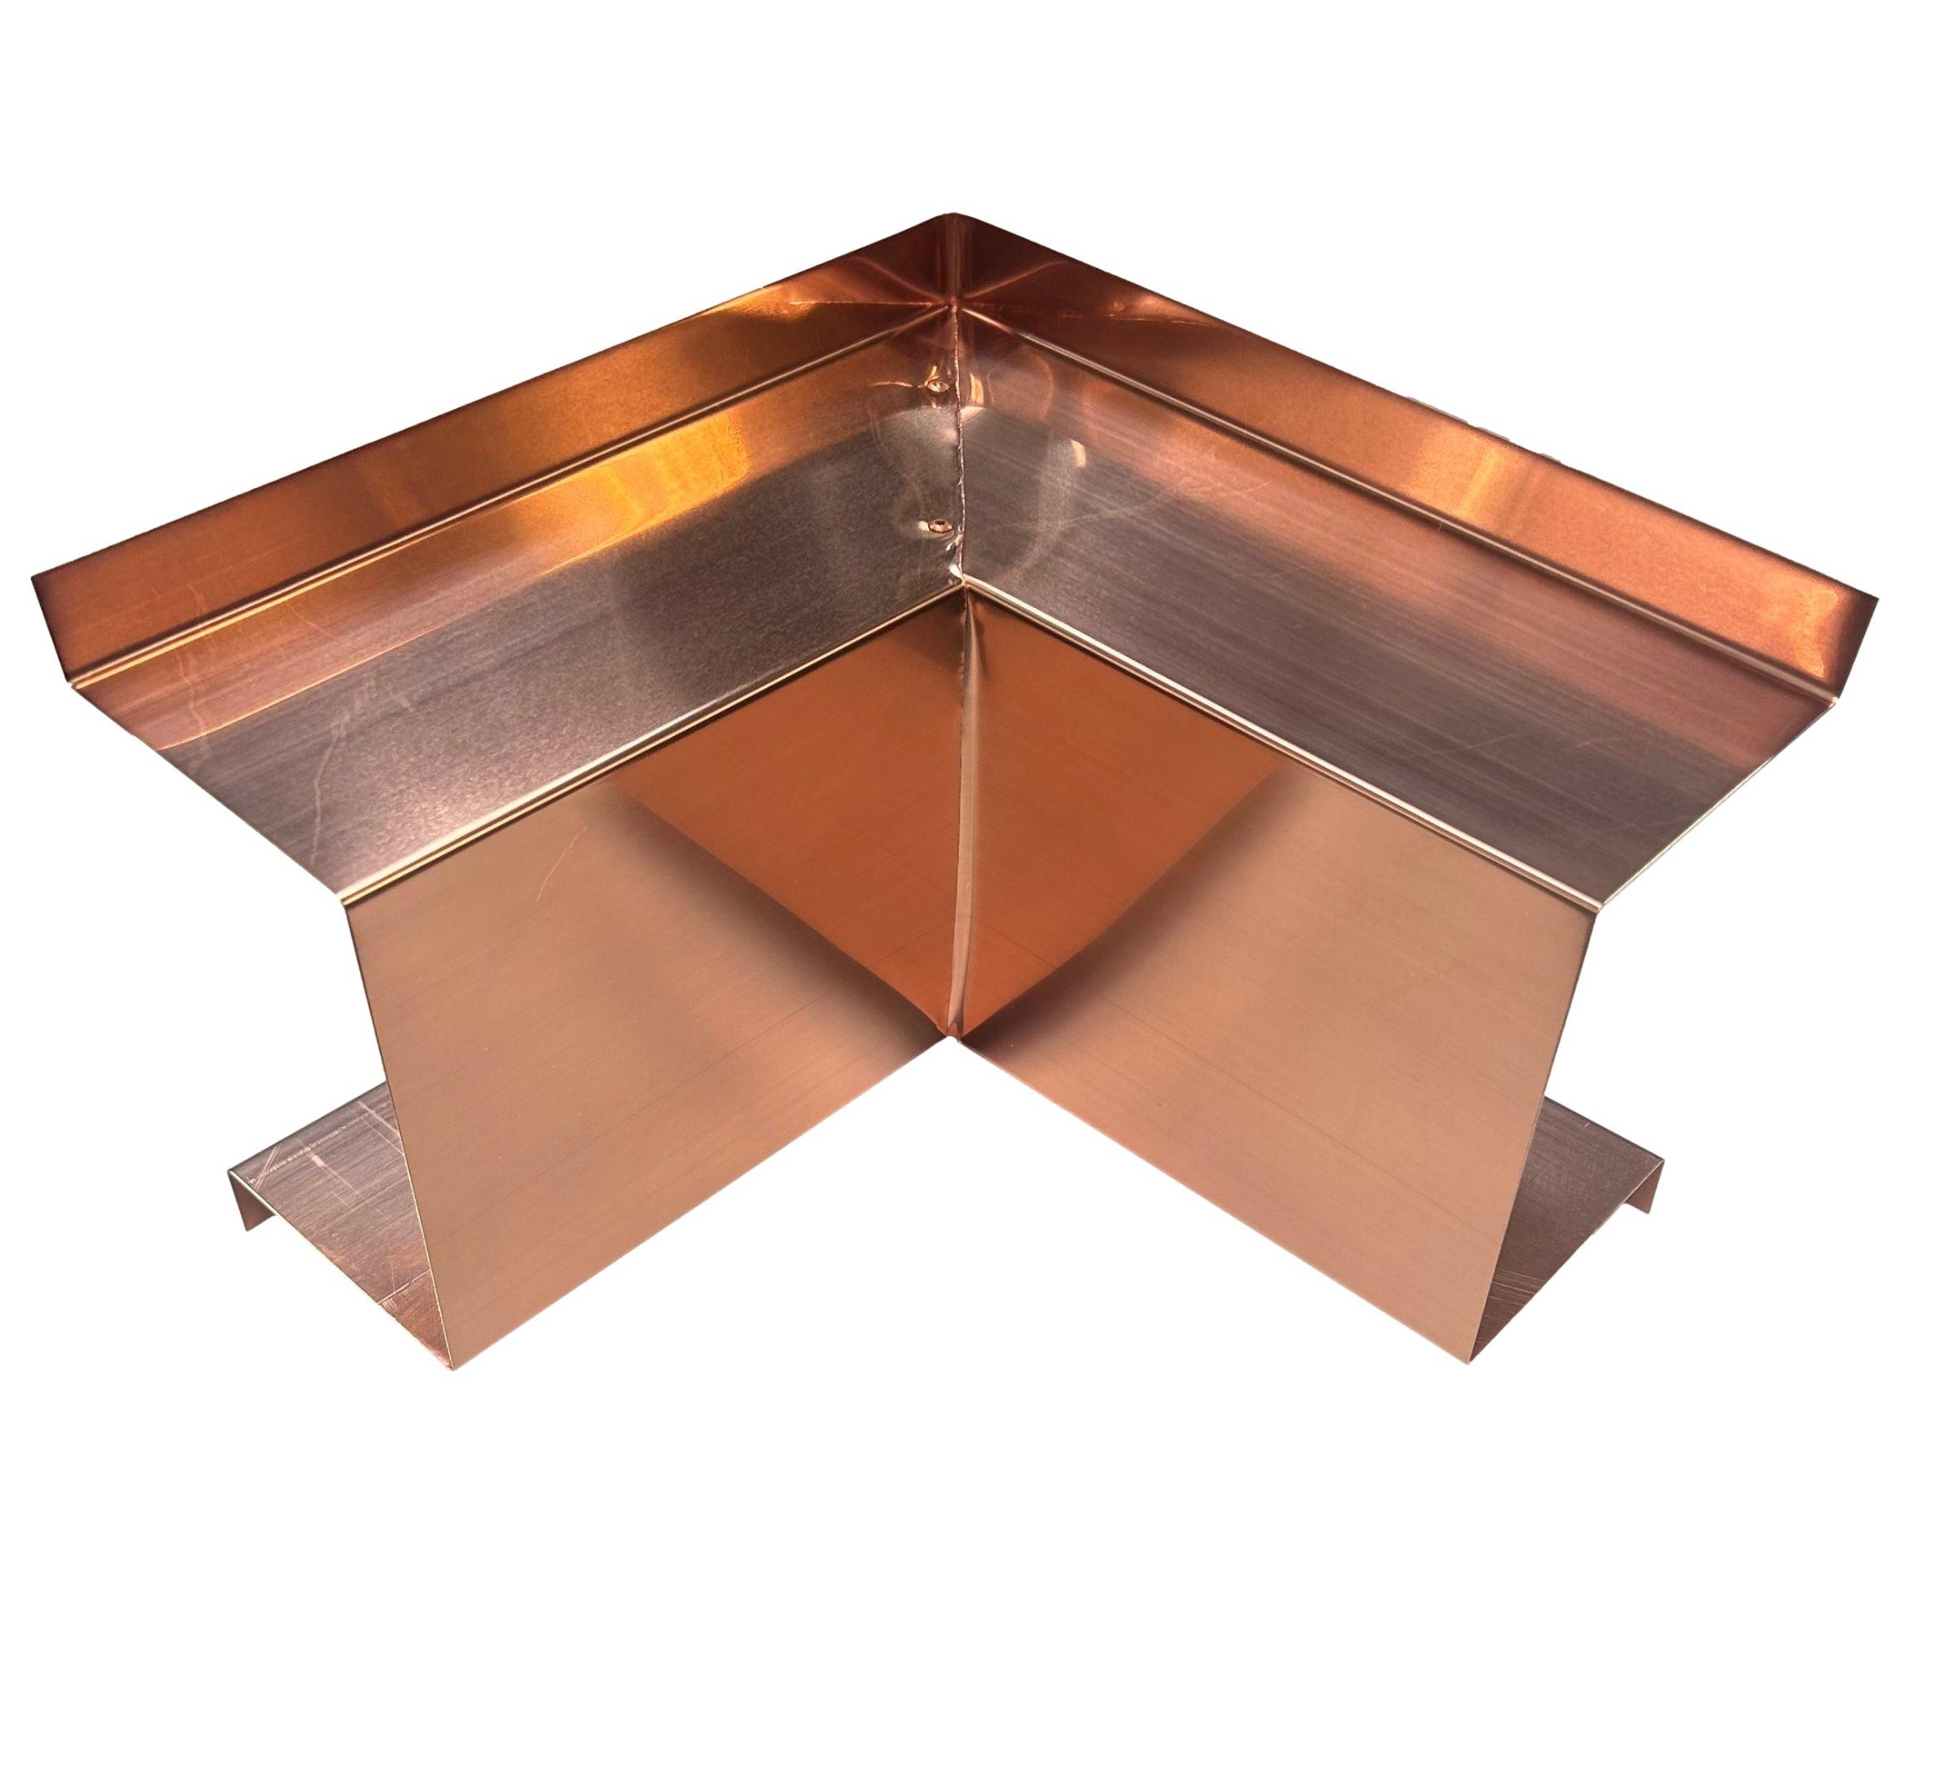 A Perma Cover Residential Series - Line Set Cover Inside Corner Elbows - Premium Quality, typically used in construction or roofing, with a right-angle design and flanges on both ends. It's ideal for HVAC installations and line set covers. The metallic surface reflects light, highlighting its smooth and shiny appearance.